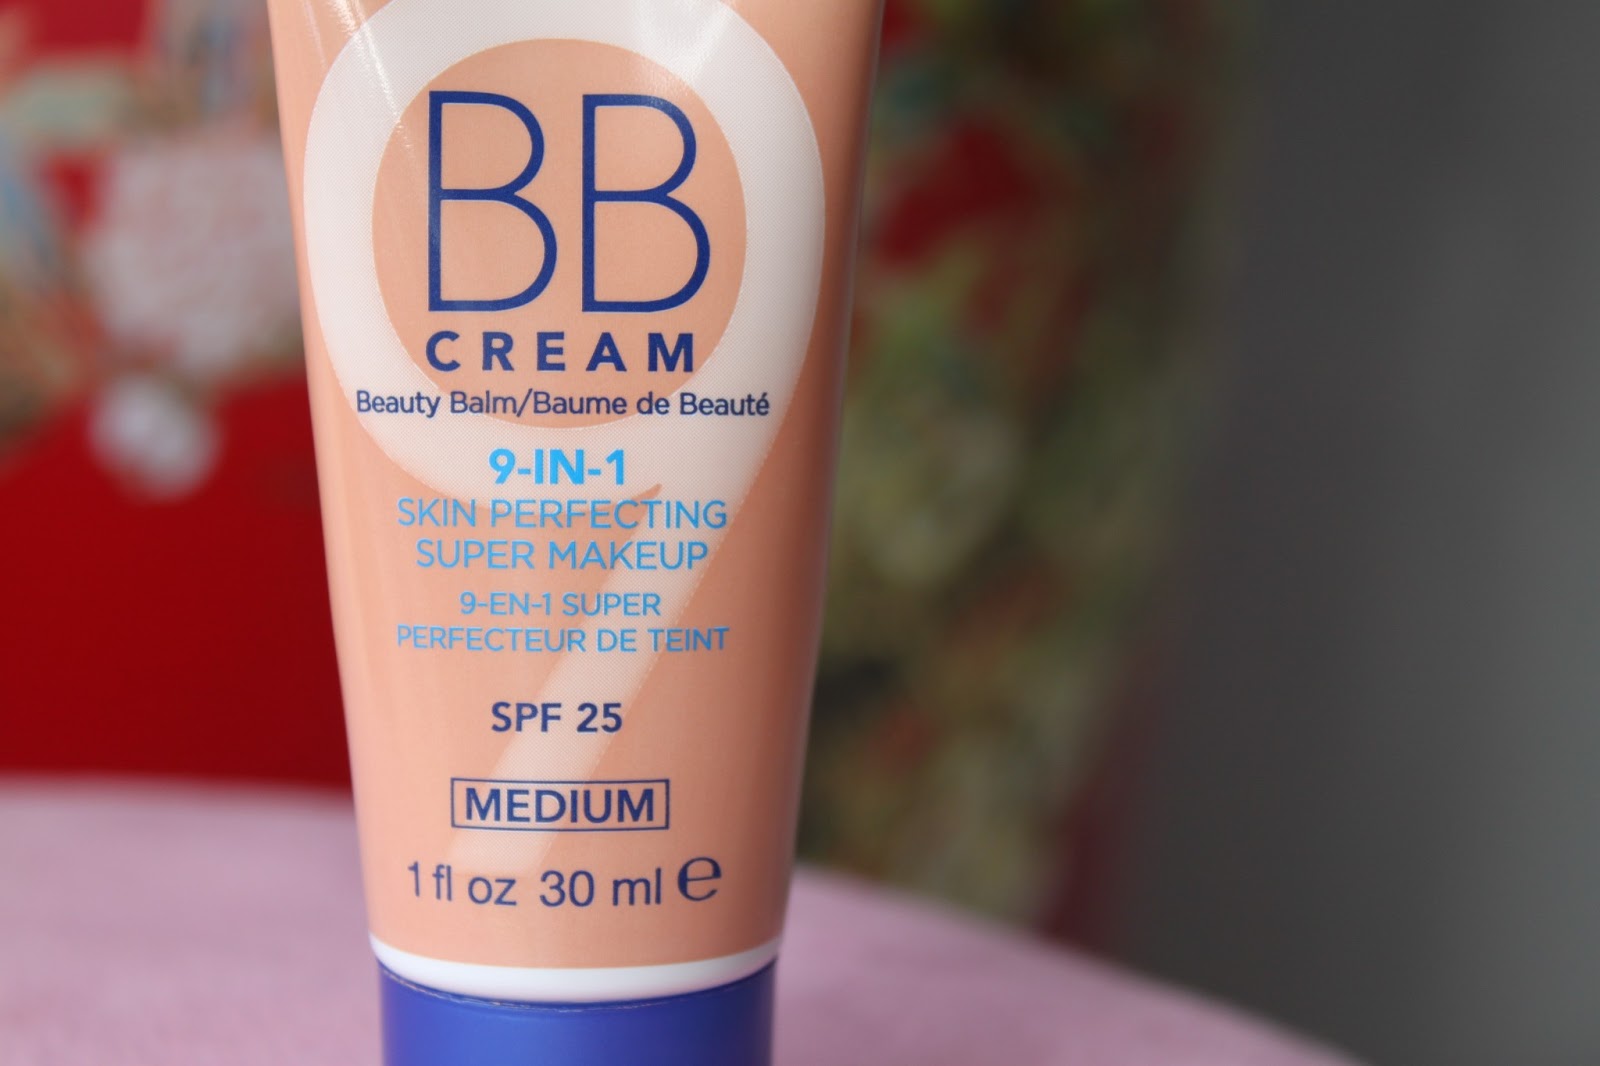 Australian Beauty Review: Review of the Rimmel BB Cream